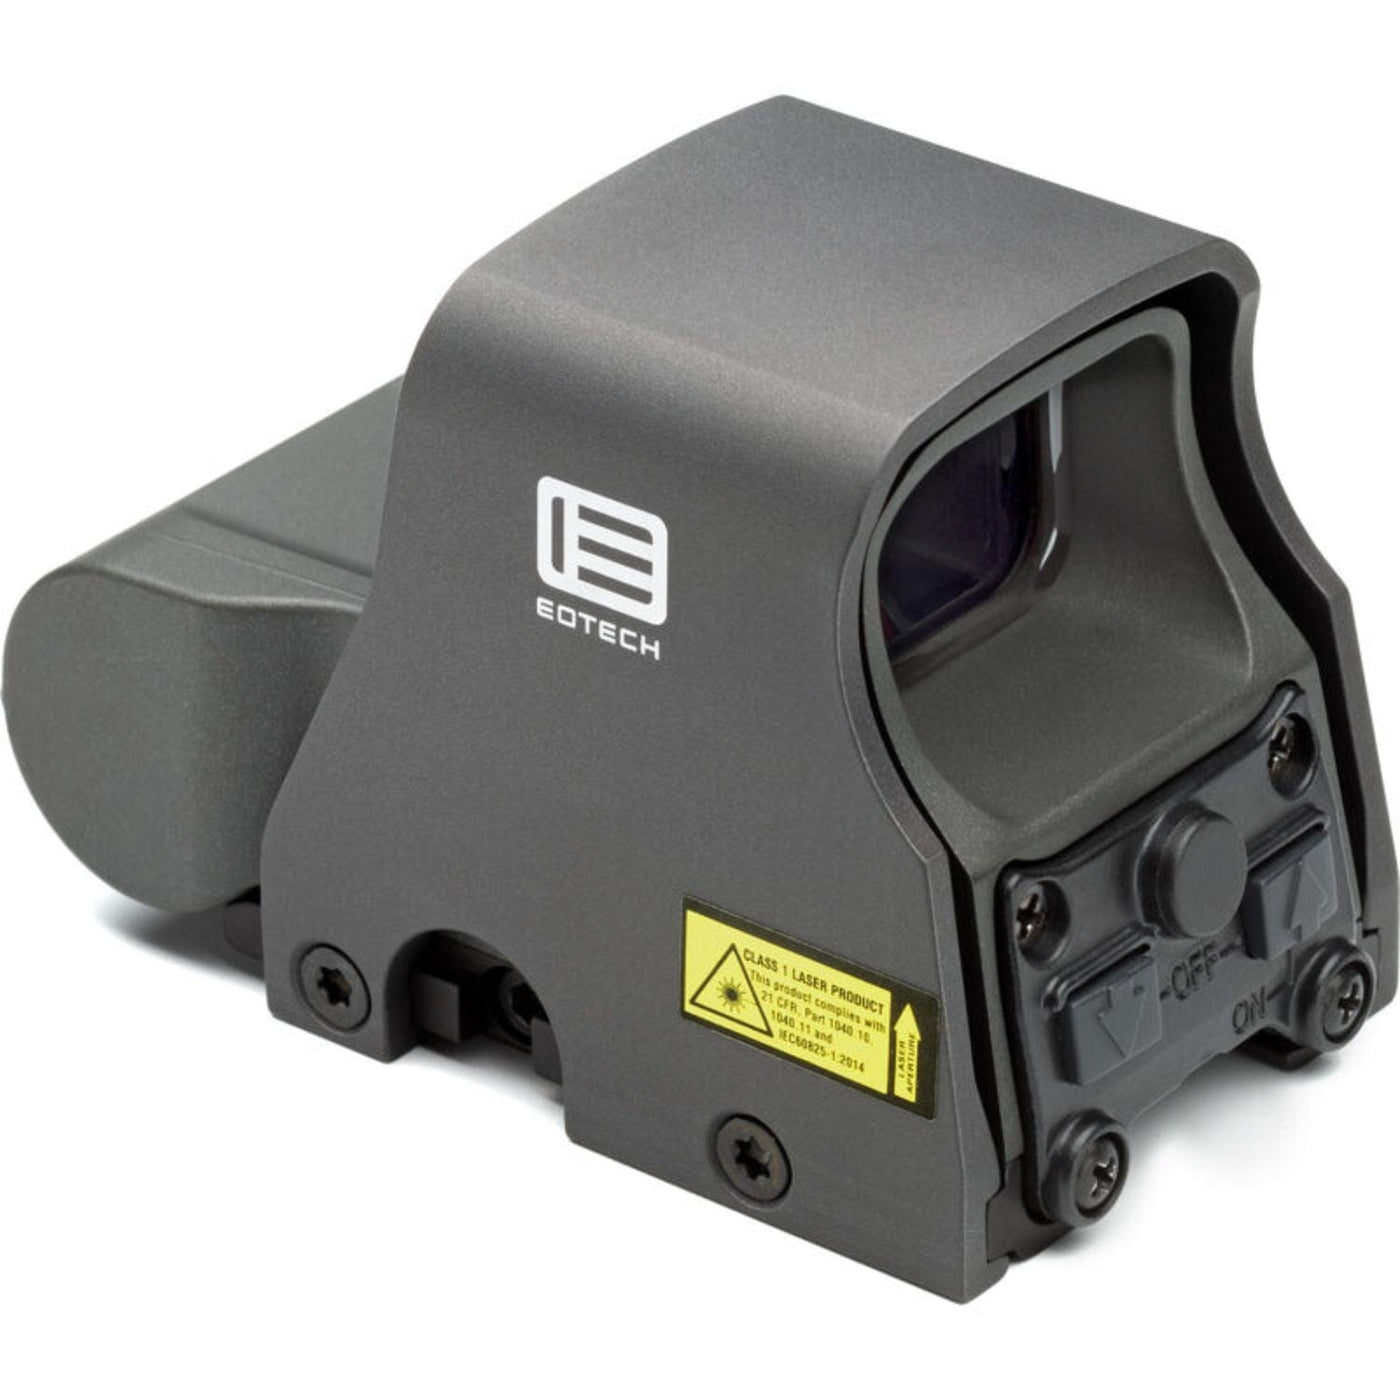 EOTECH EOTECH XPS2-0GREY Holographic Weapon Sight Optics And Sights